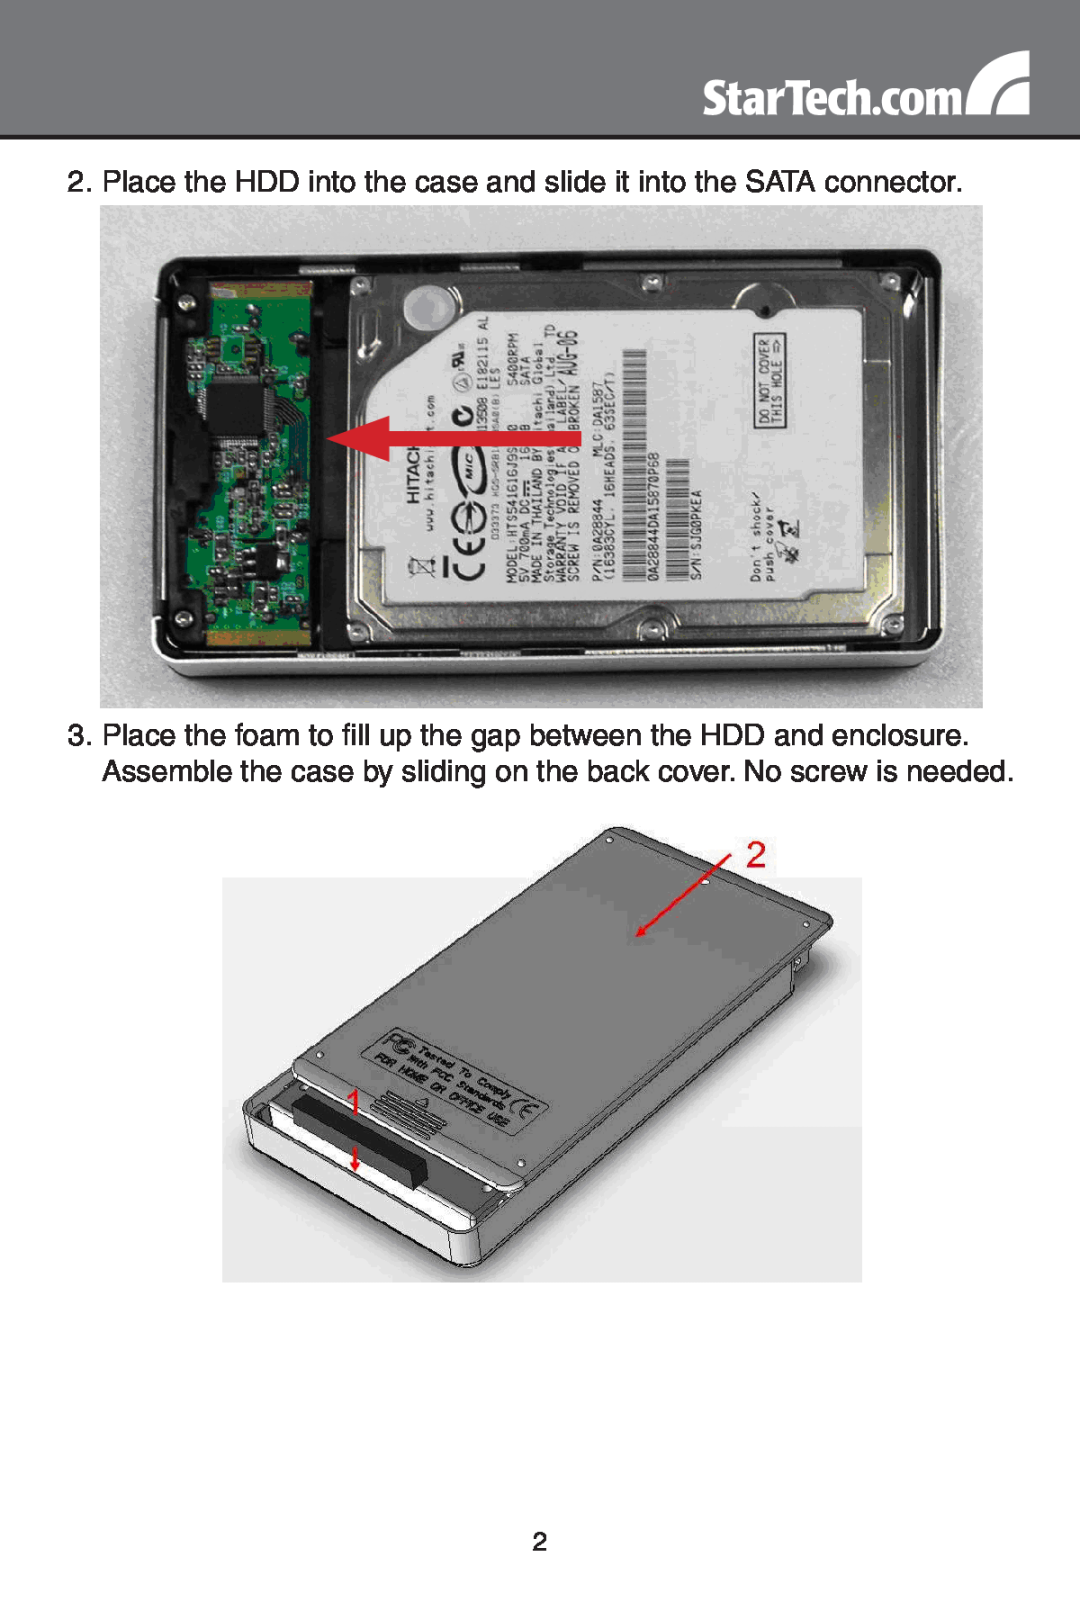 StarTech.com SAT2510BU2B instruction manual Place the HDD into the case and slide it into the SATA connector 